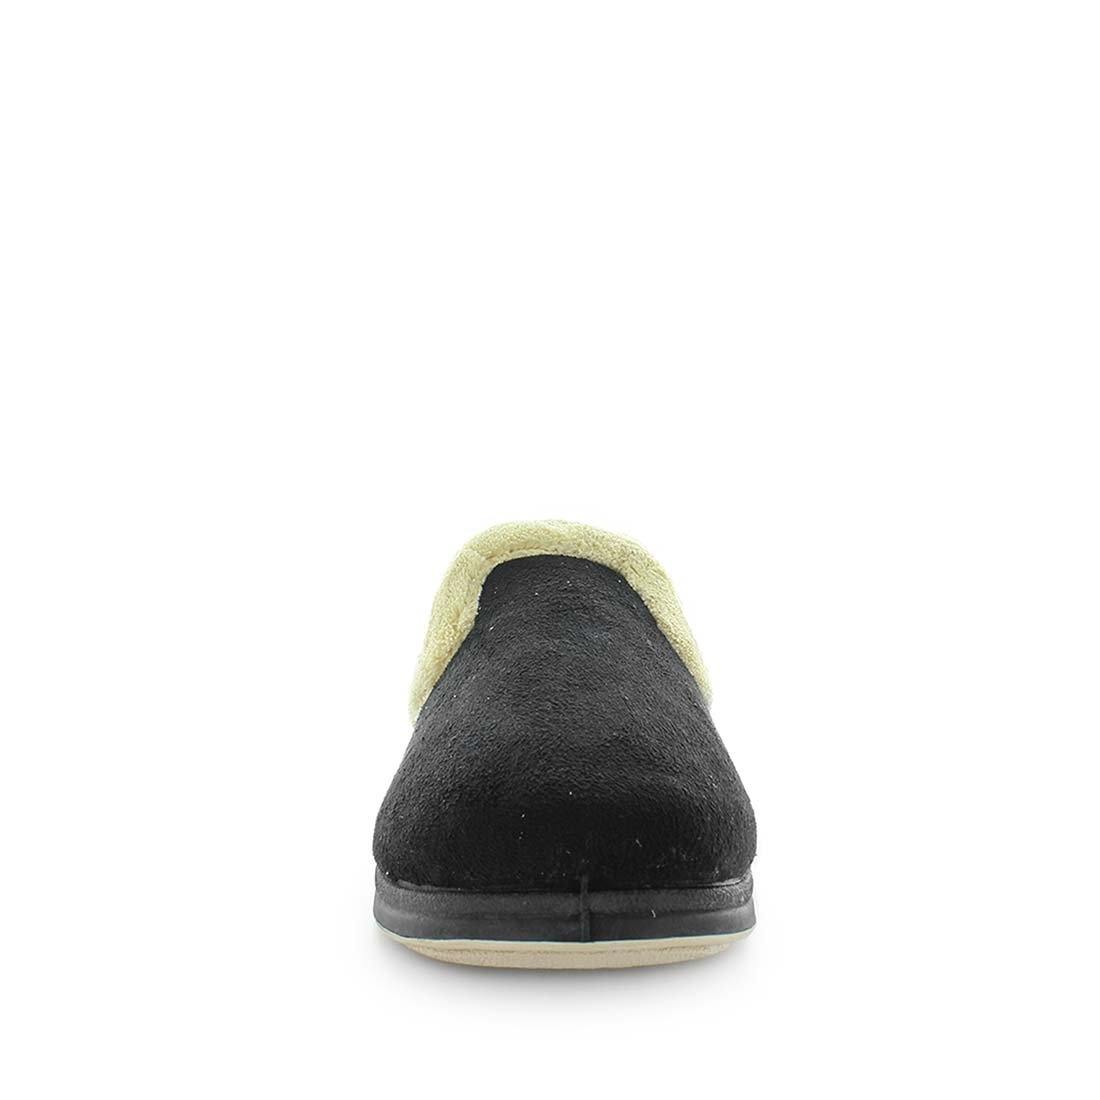 Classic womens slip on slipper, Emille by panda slippers. A slip on style slipper made with soft materials and comfy fit design for the perfect indoor slipper. showing a non slip sole and micro terry trimming - comfort slippers - womens comfort slippers